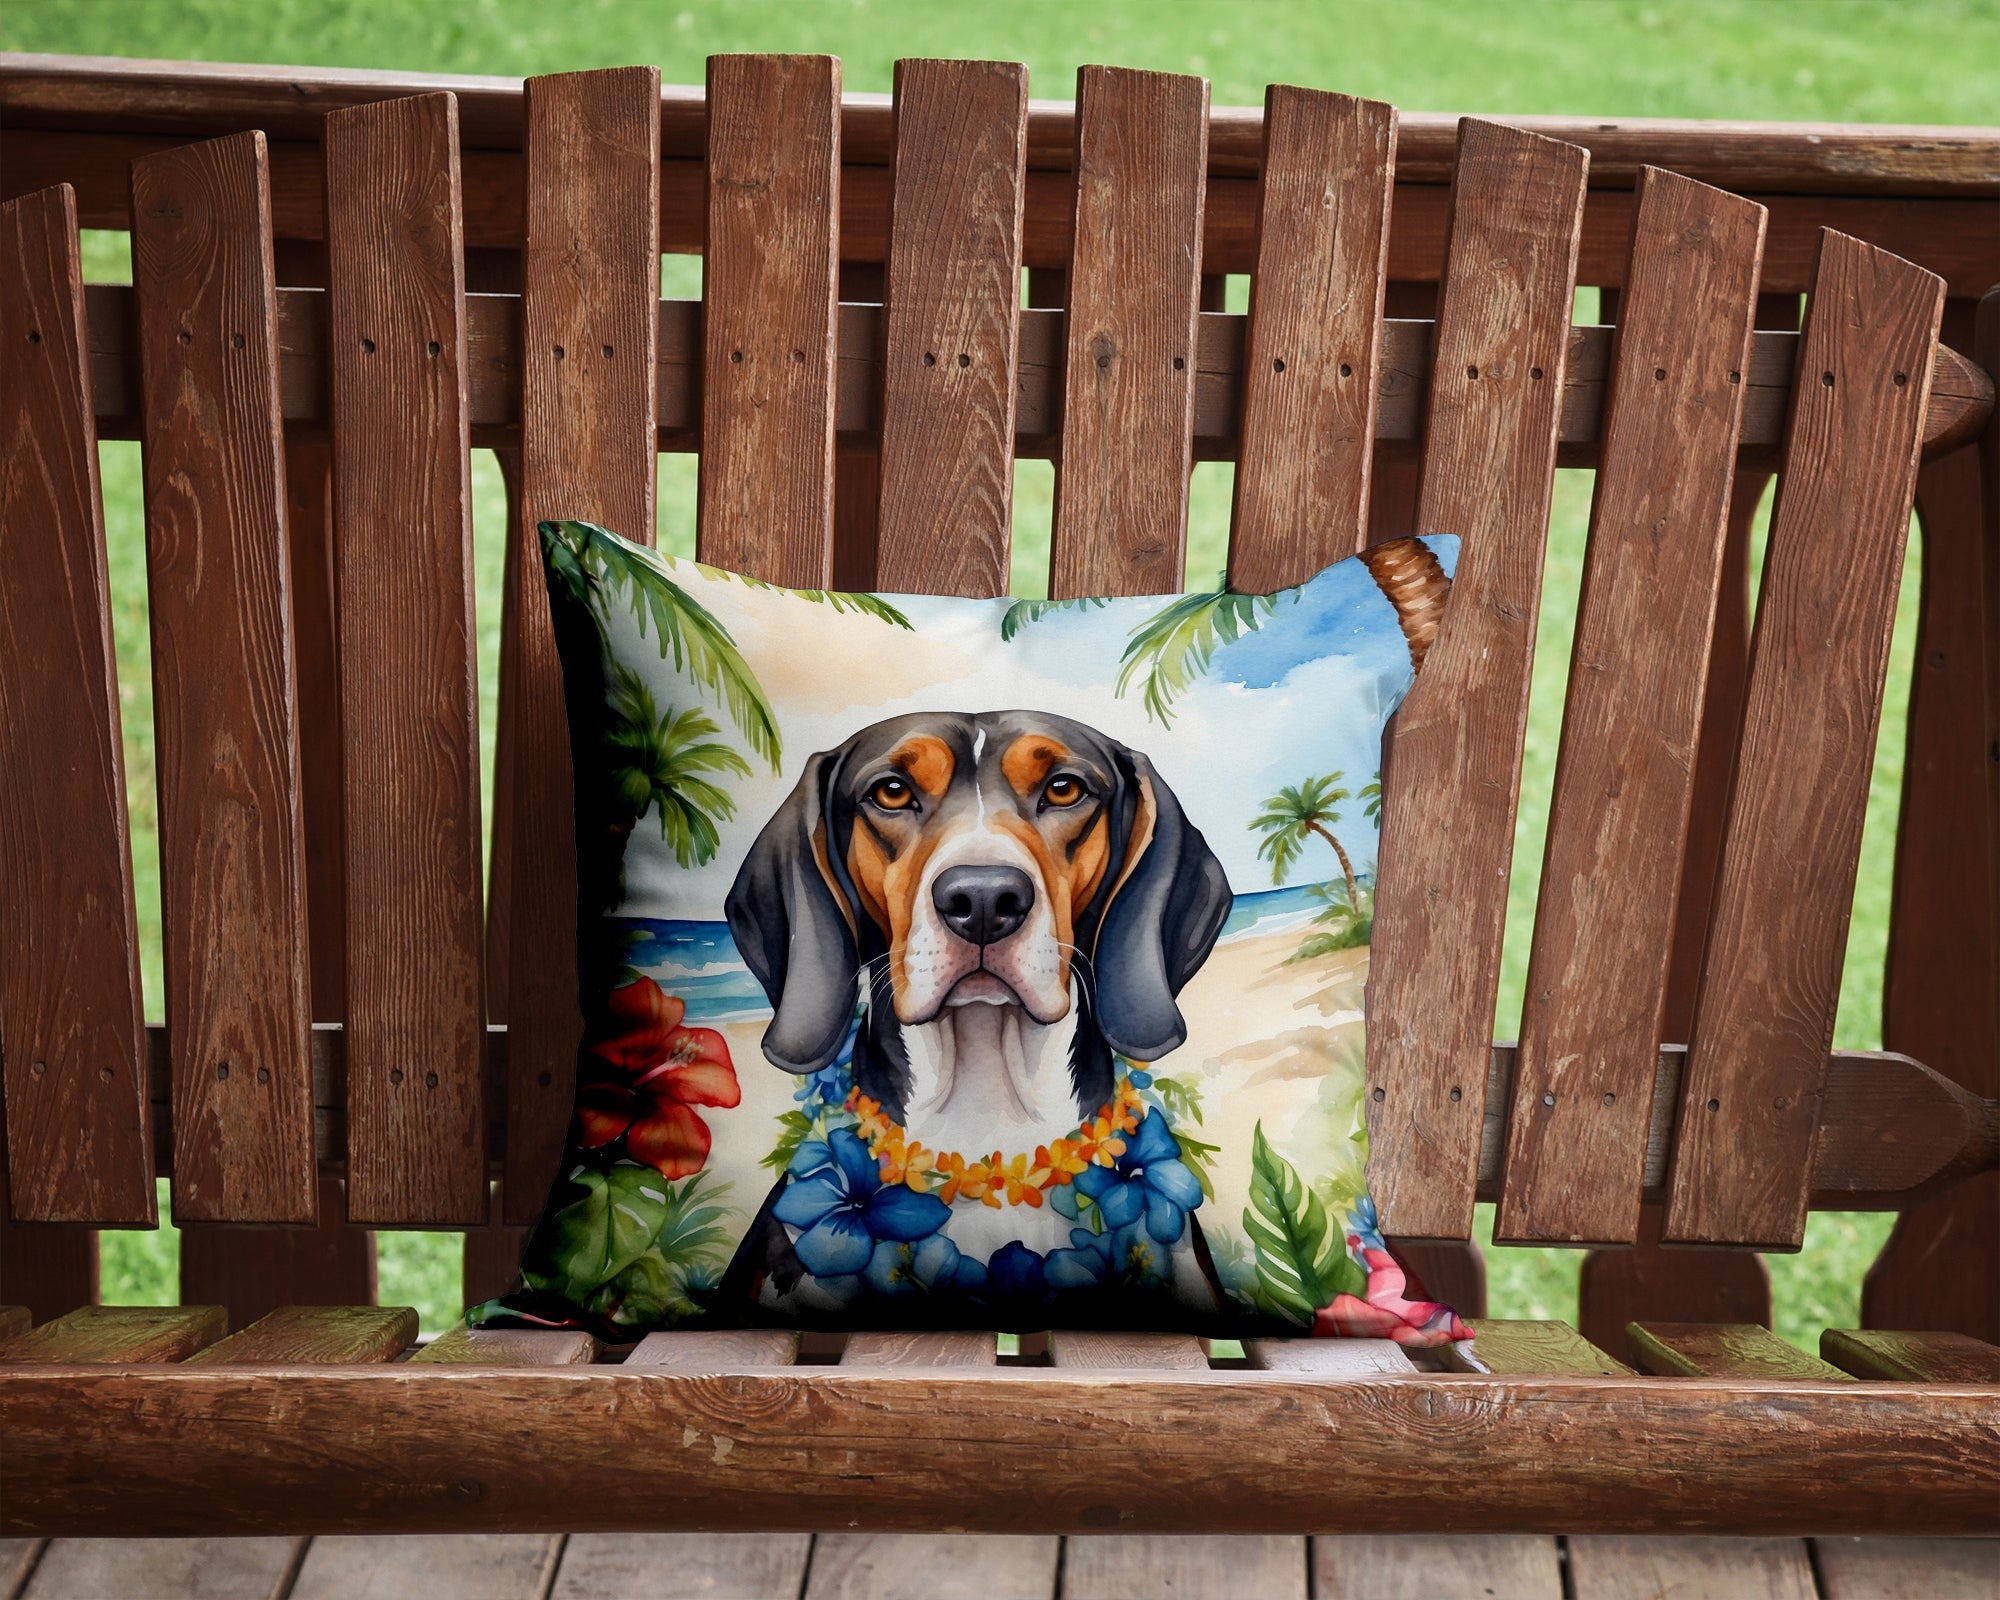 Buy this American English Coonhound Luau Throw Pillow